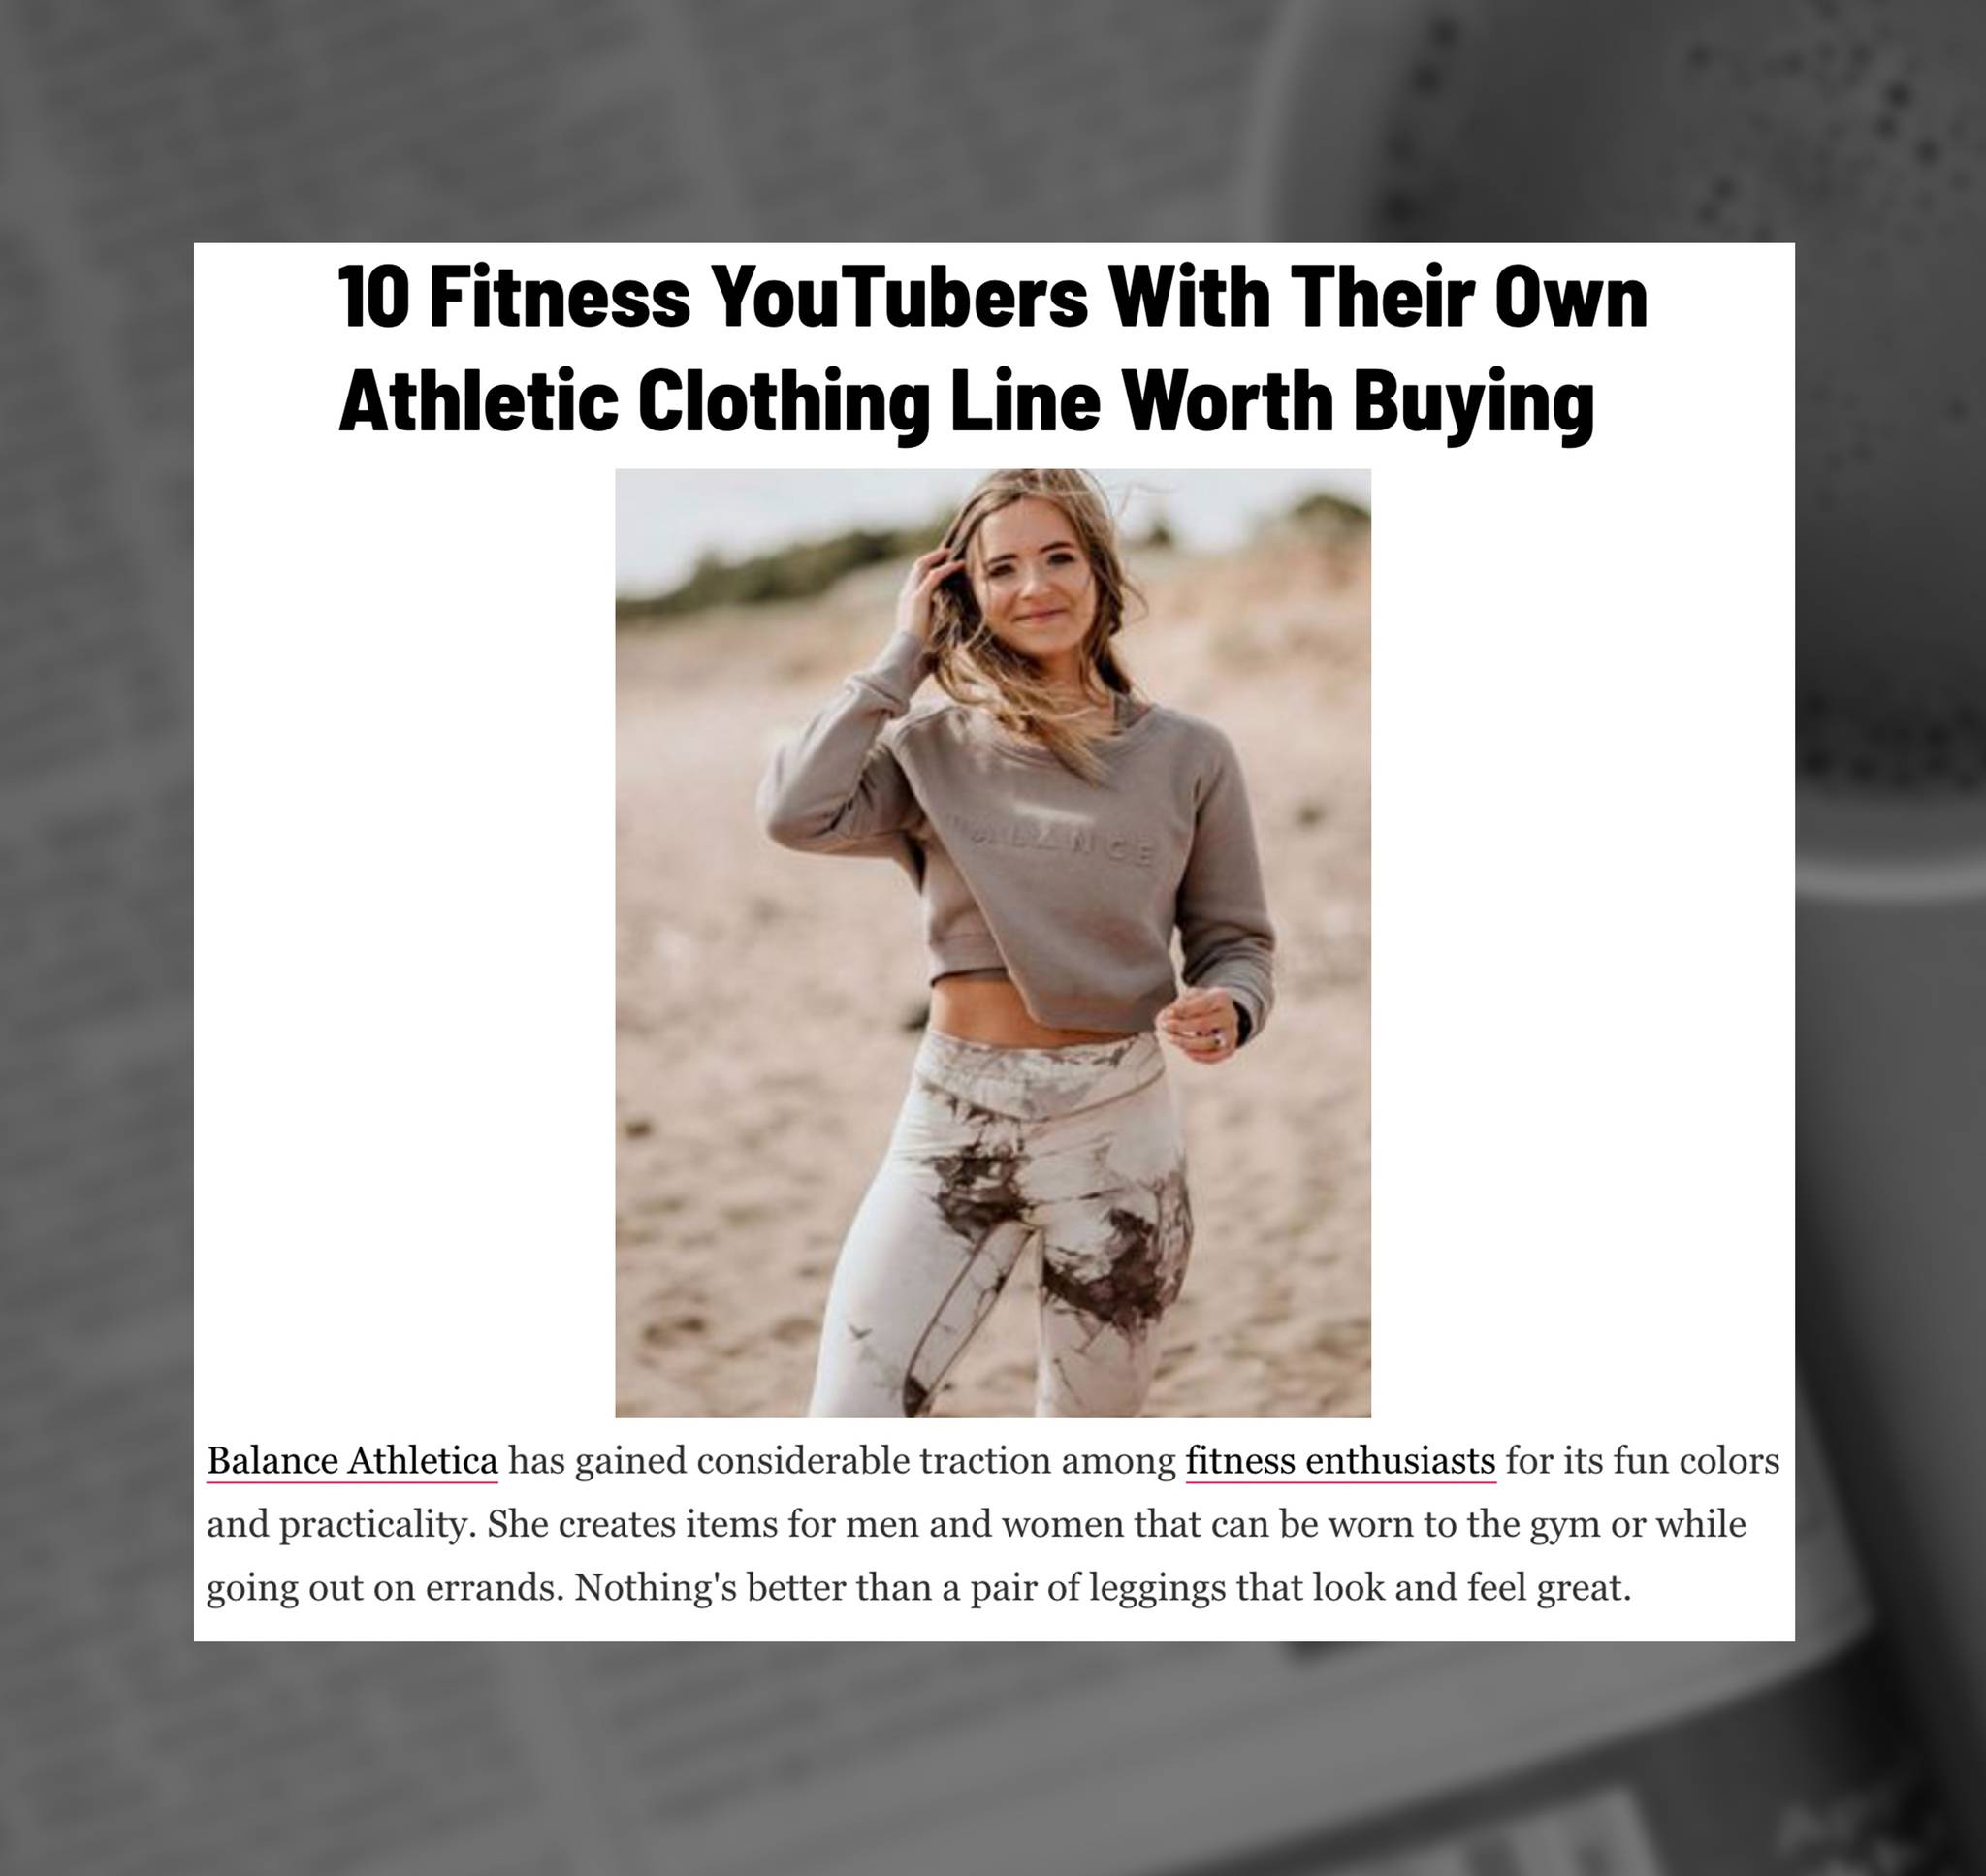 The Athleta Girl clothing line: Is it worth the price?